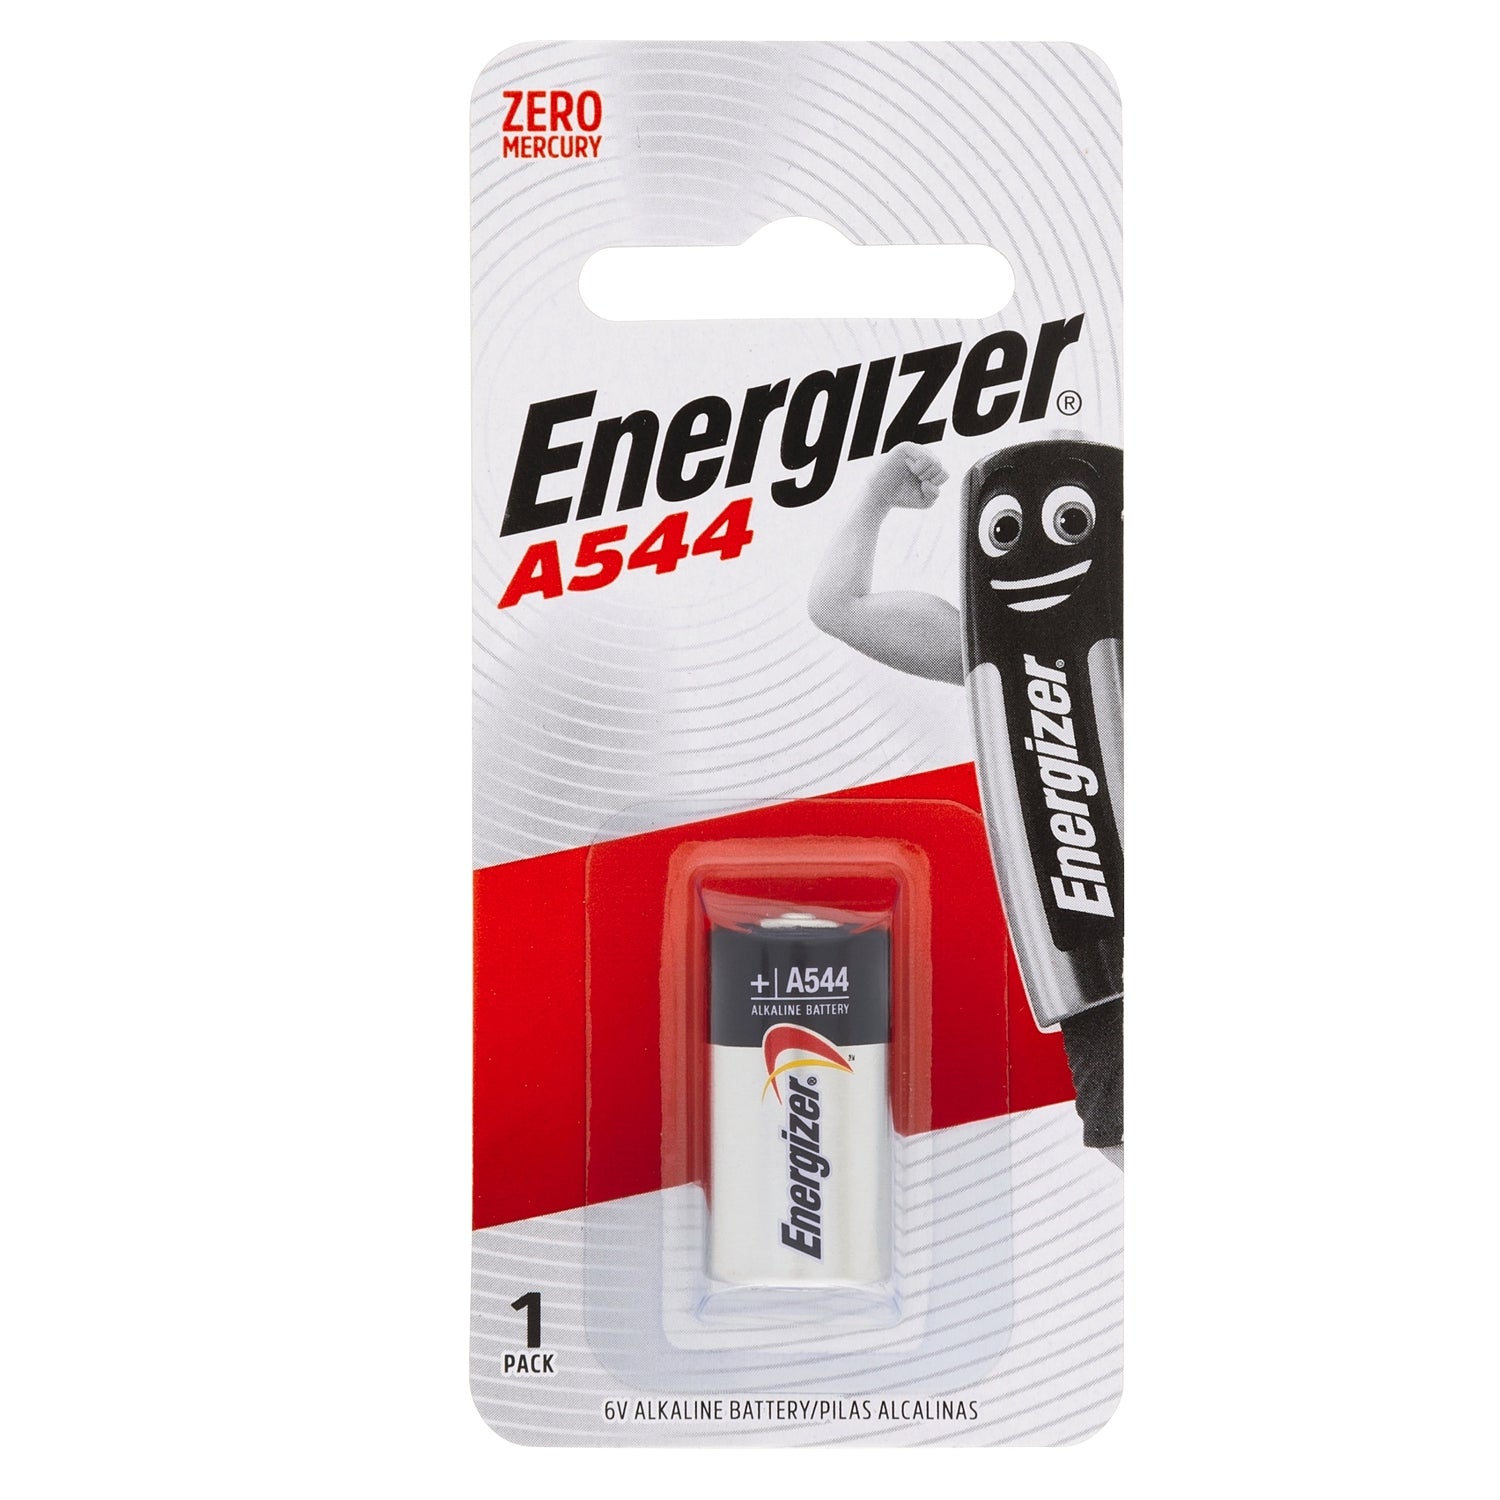 Energizer 6v Alkaline Battery 1 Pack: A544 E301628001 Power Tool Services